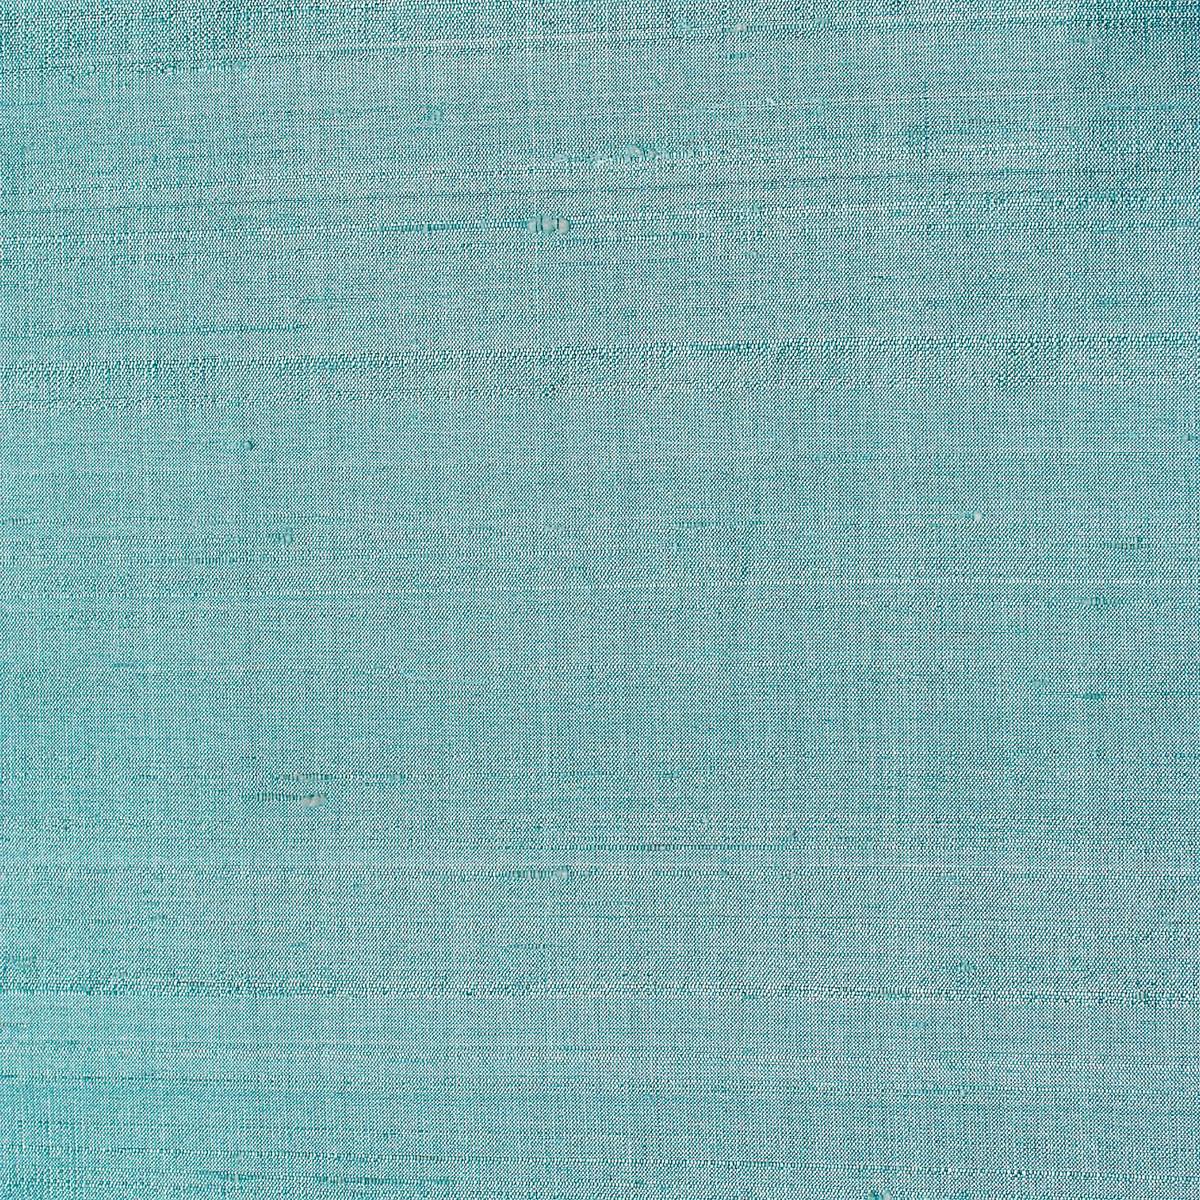 Lilaea Silks Turquoise Fabric by Harlequin